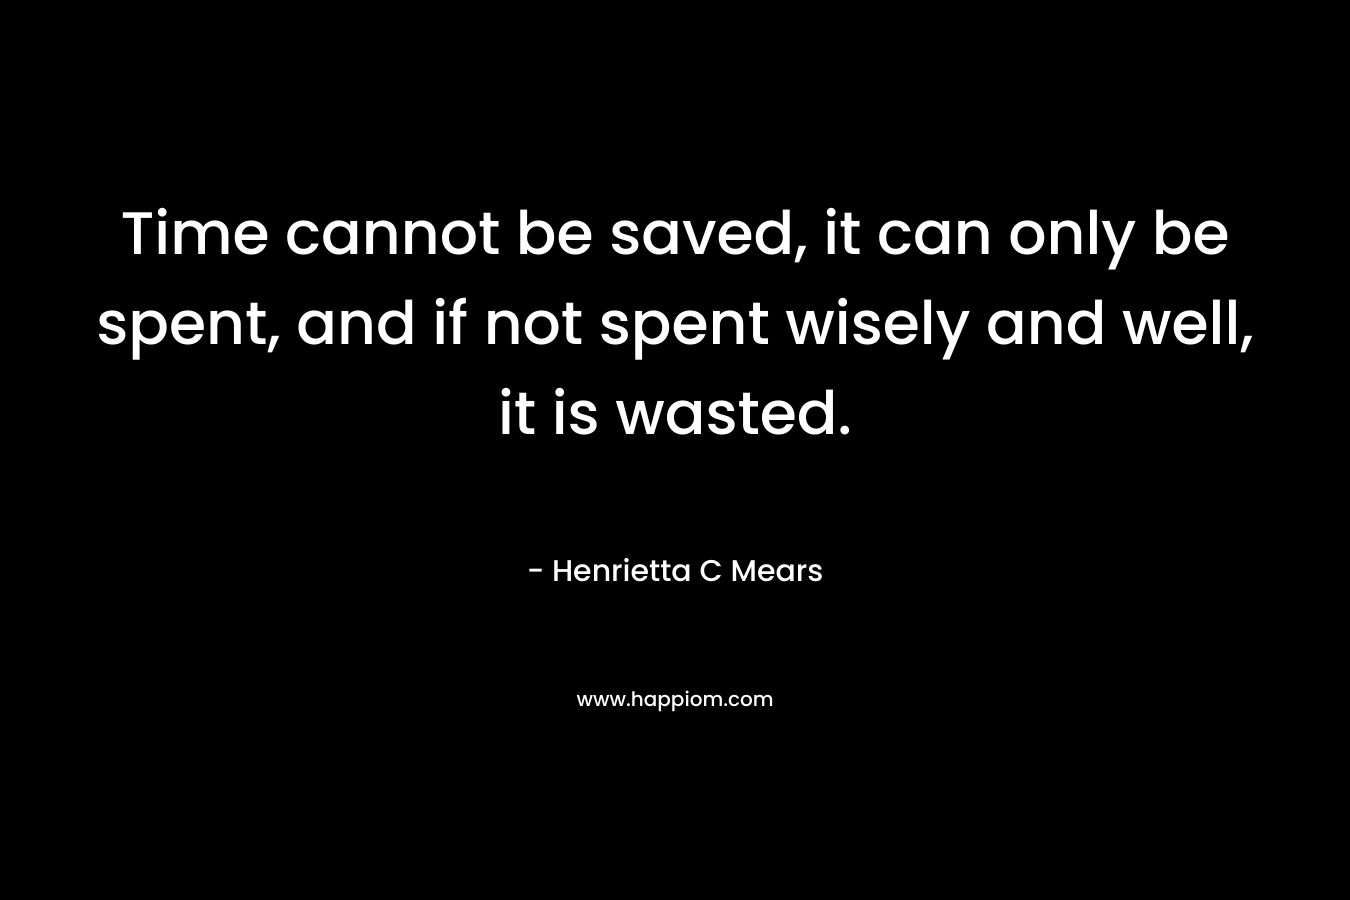 Time cannot be saved, it can only be spent, and if not spent wisely and well, it is wasted. – Henrietta C Mears